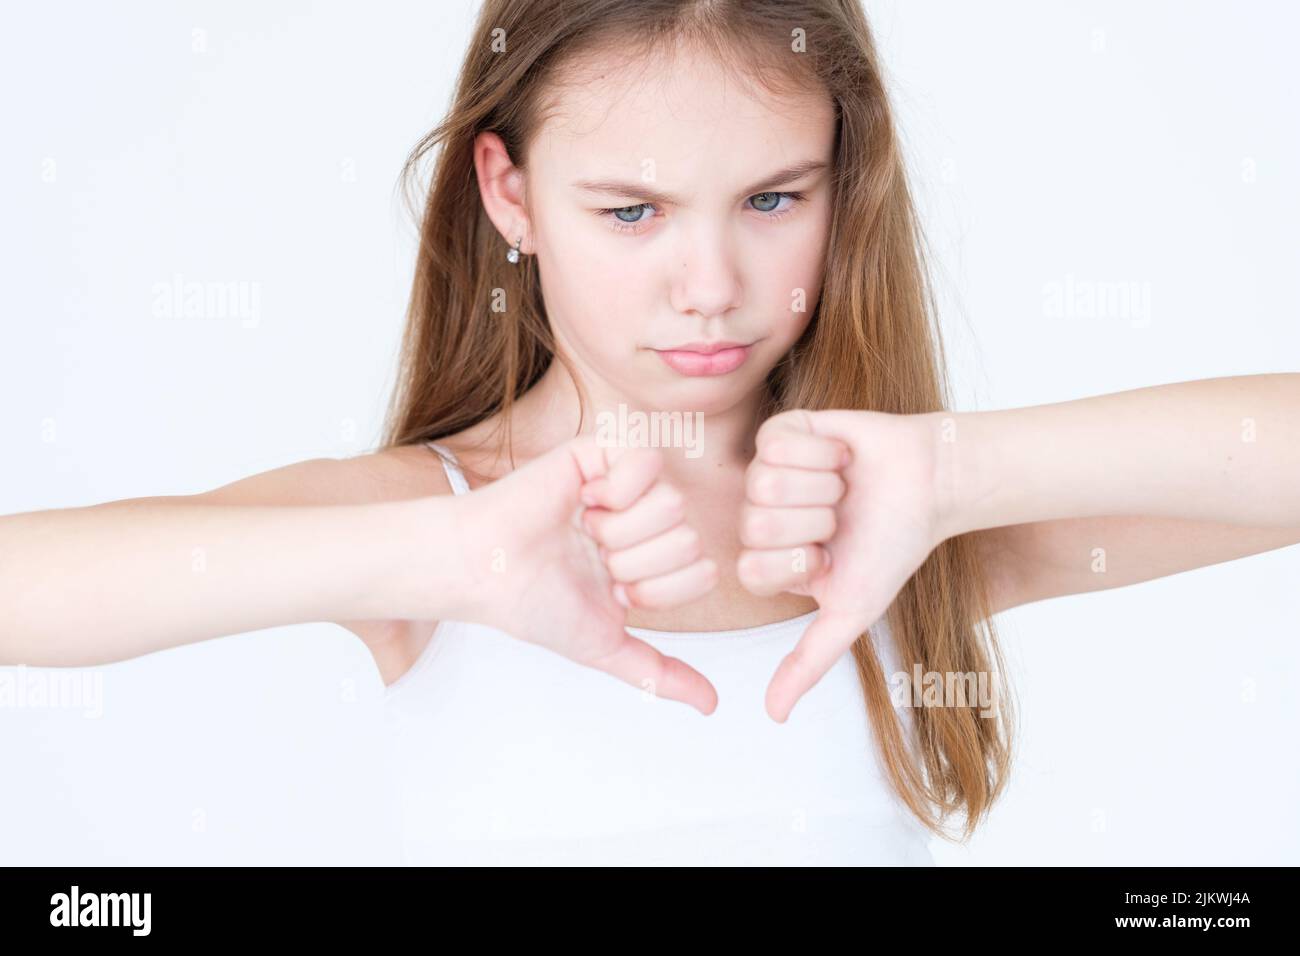 emotion discontent dissatisfied child thumbs down Stock Photo